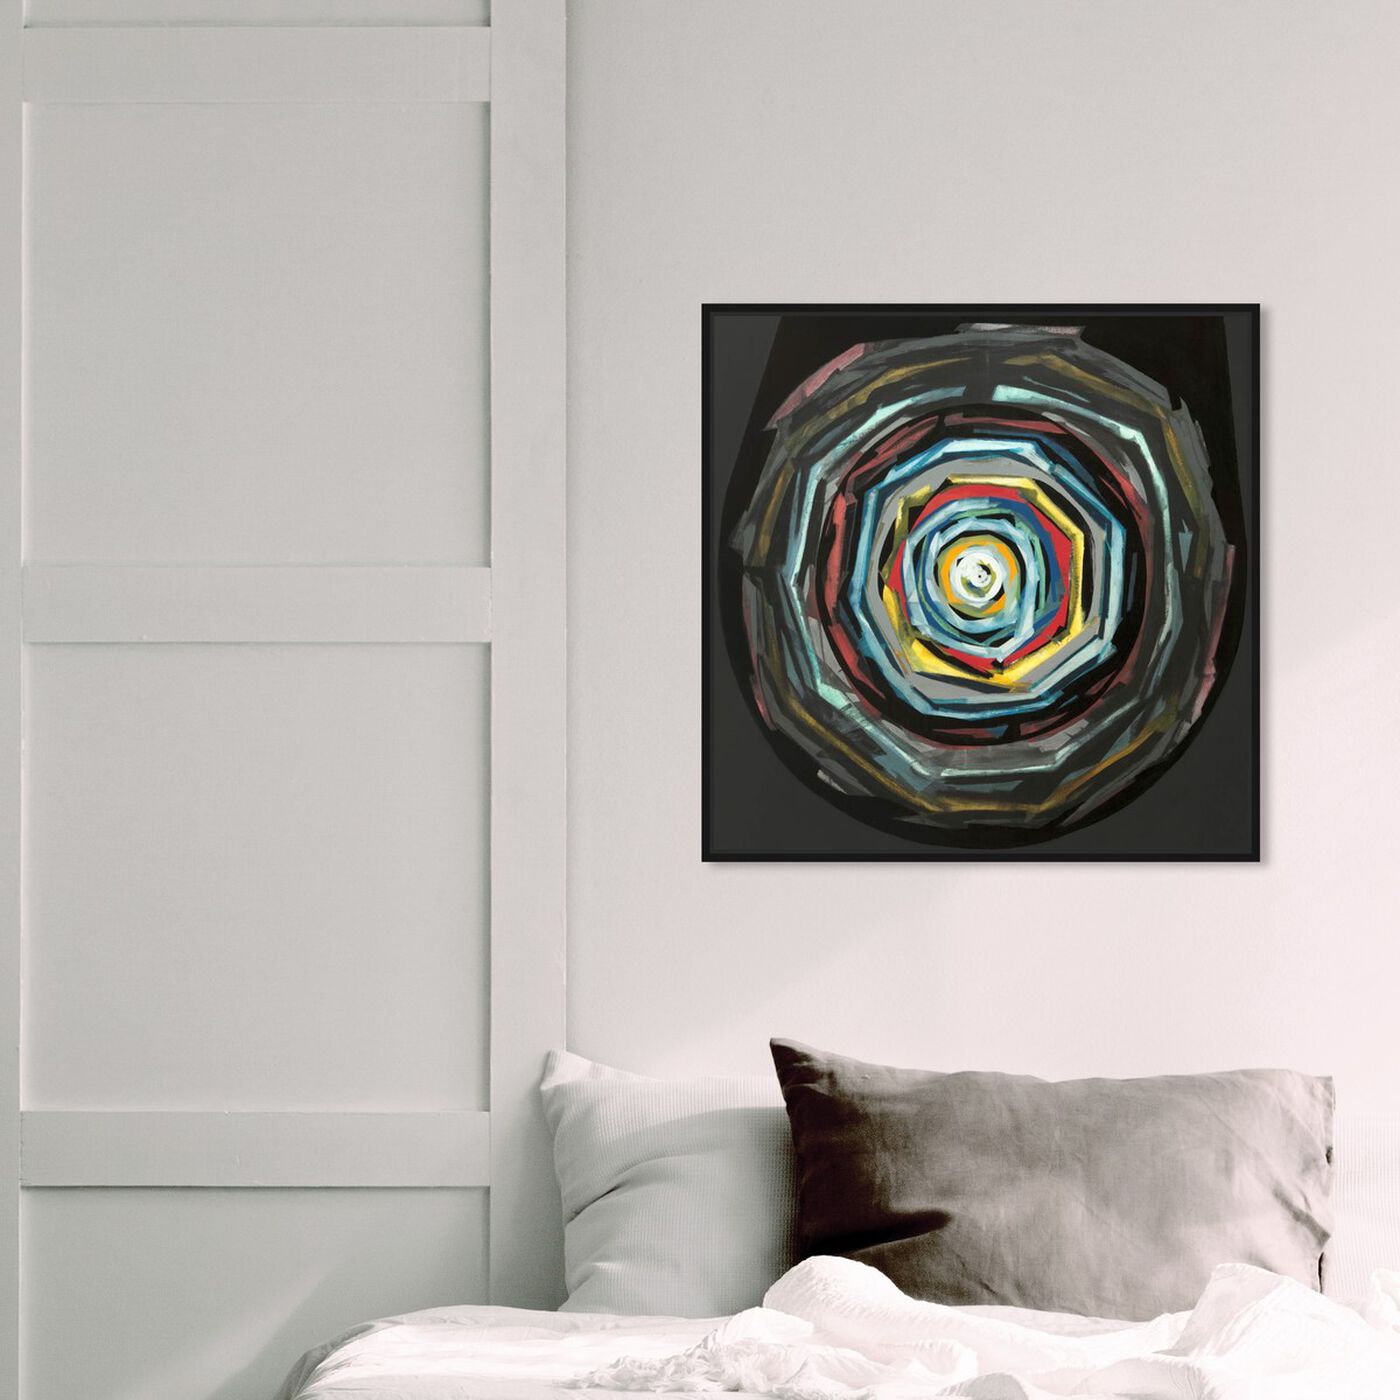 Hanging view of Sai - Pictis Spiralis II featuring abstract and paint art.